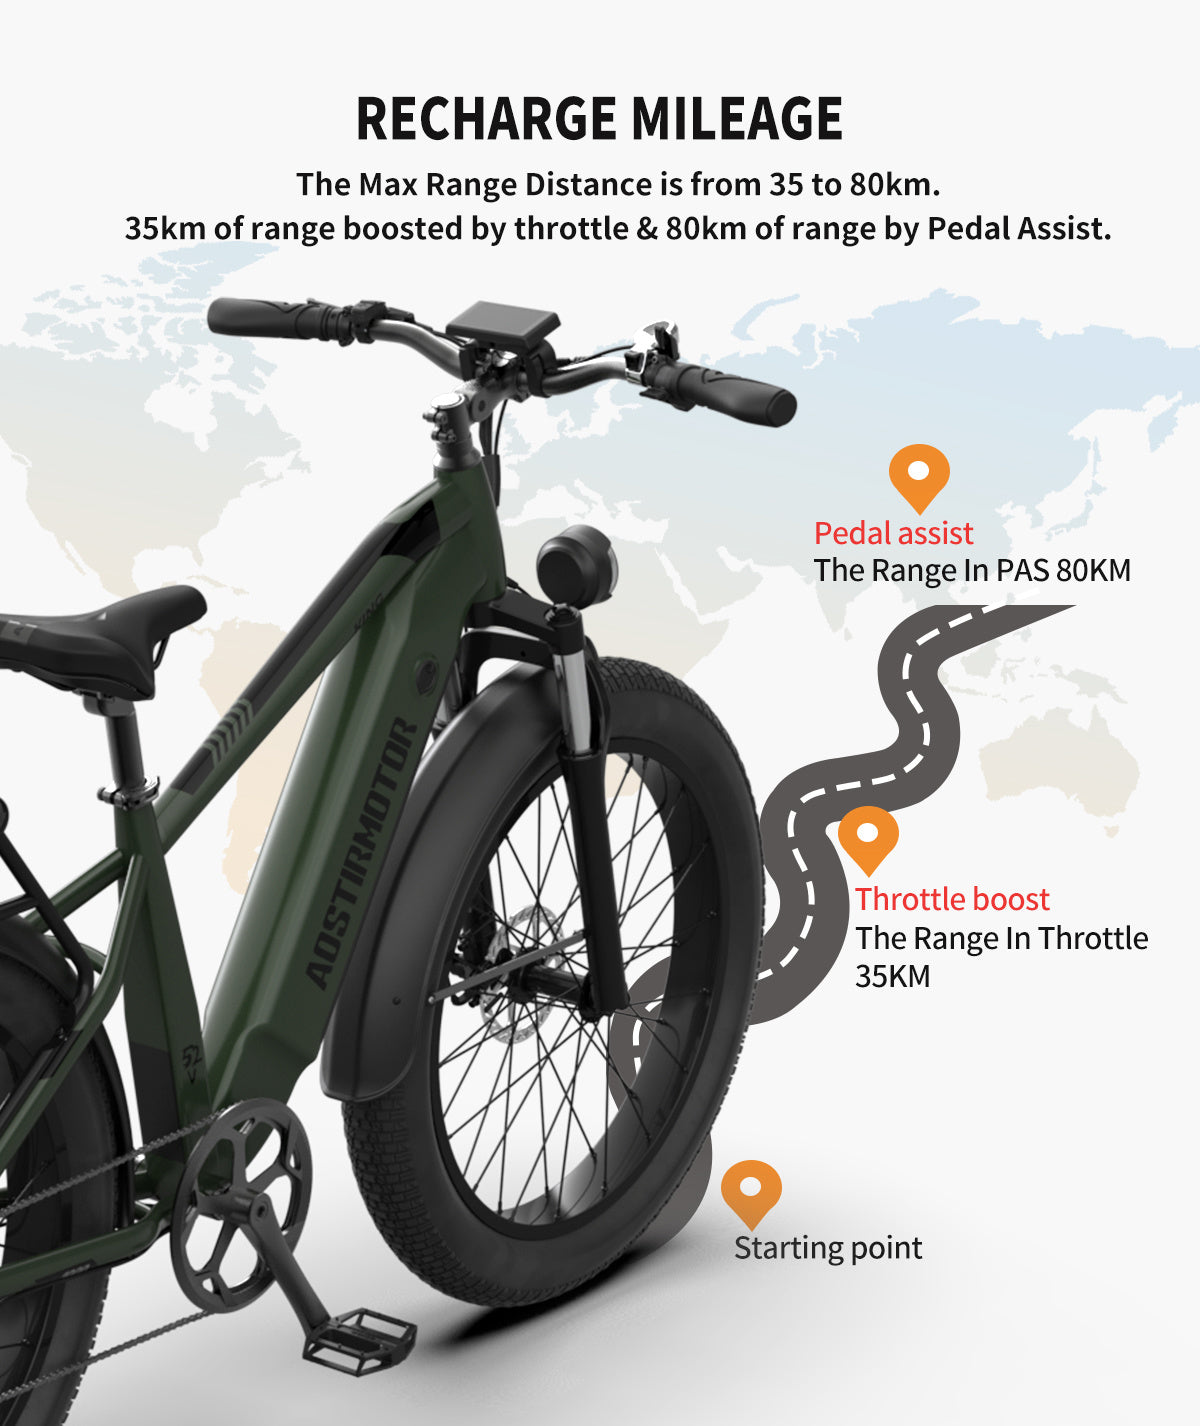 New Pattern Electric Bike Fat Tire With Removable Lithium Battery for Adults